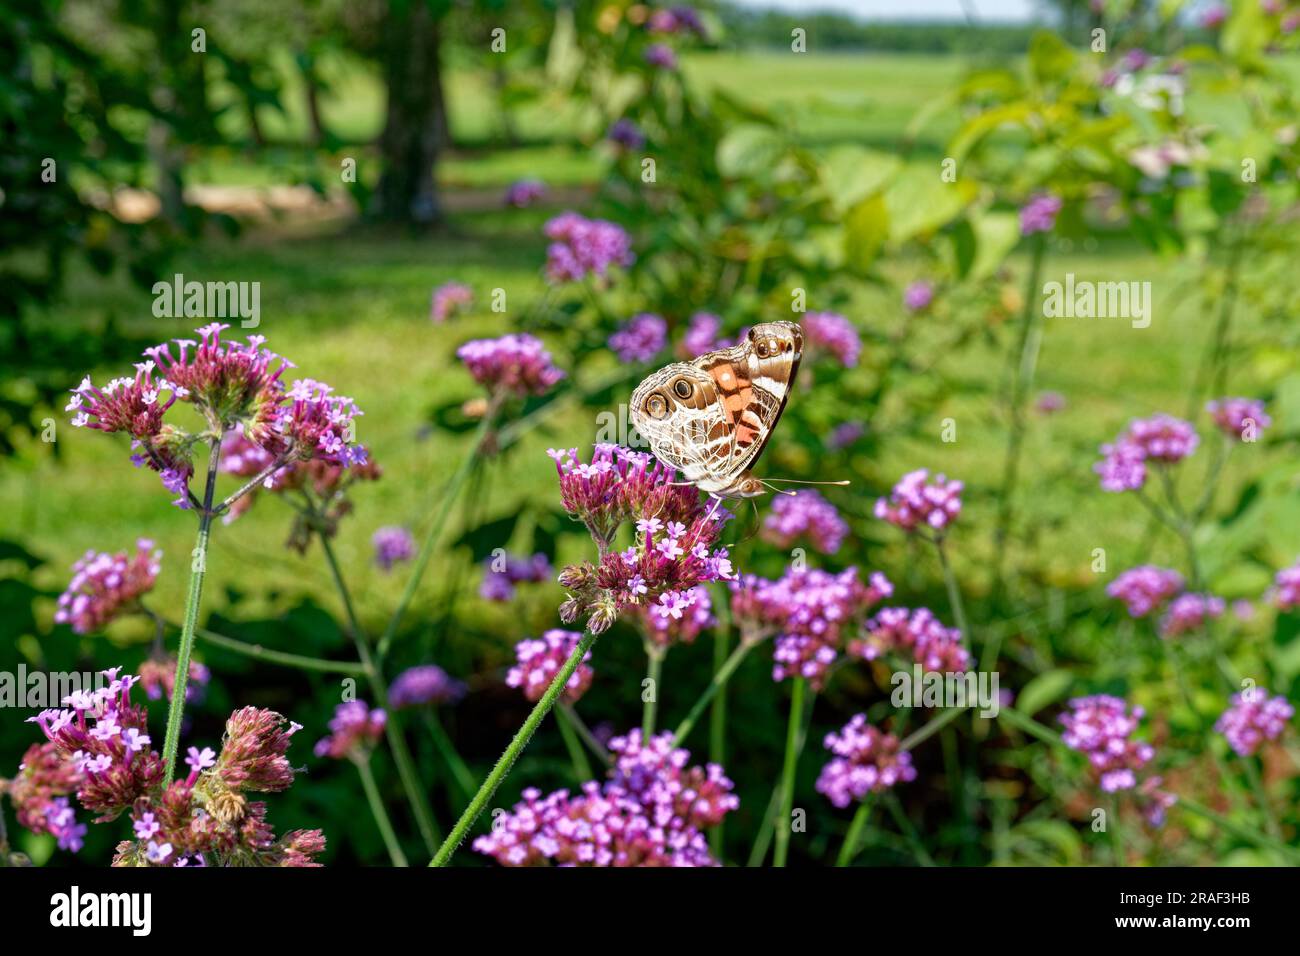 Profile view of a painted lady butterfly collecting nectar from a purple verbena bonariensis flowering plant in a garden on a sunny day in summertime Stock Photo